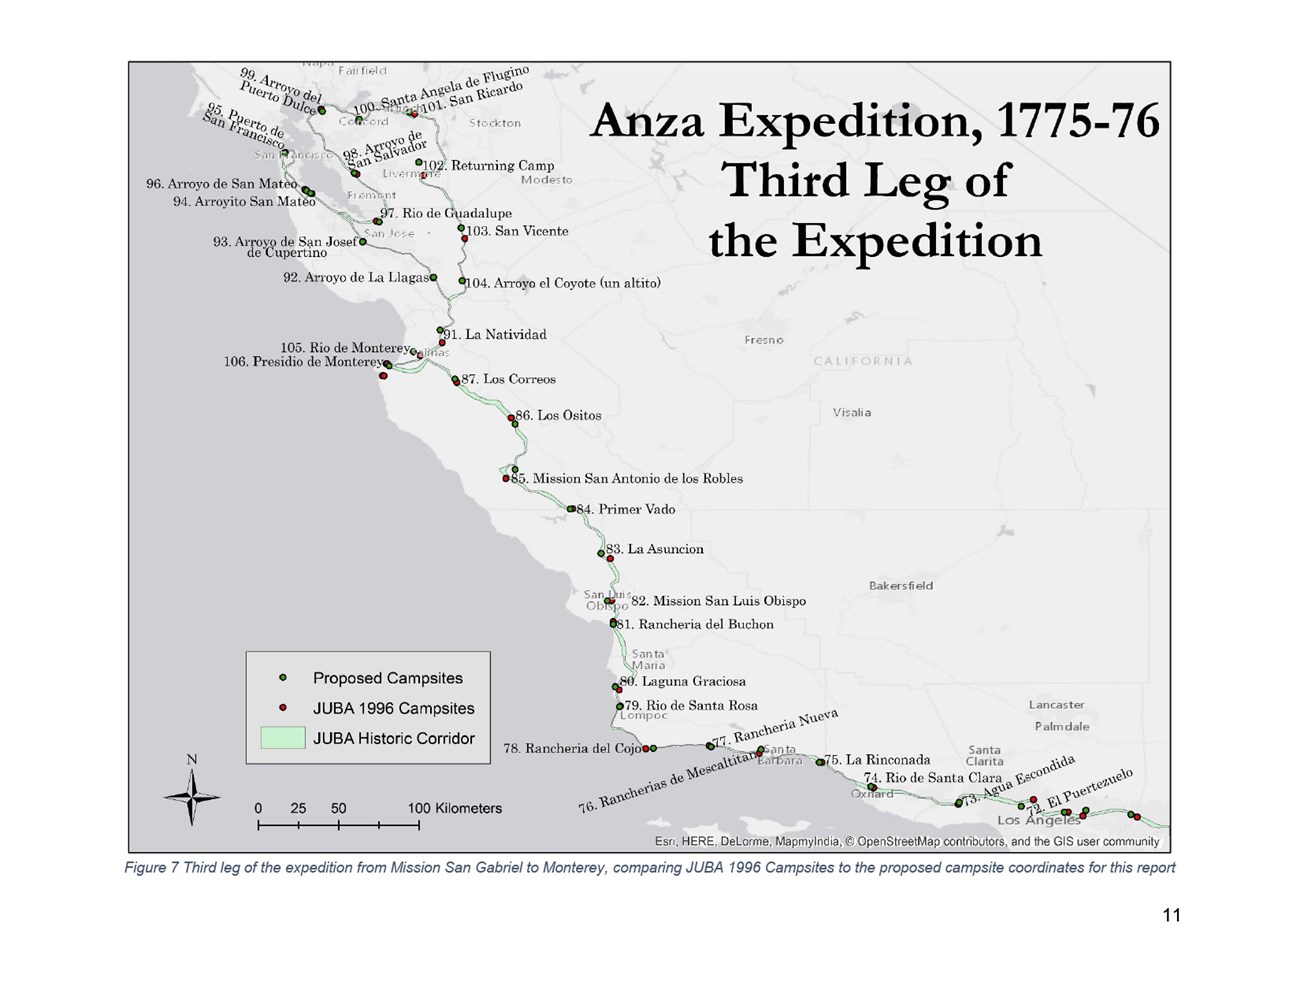 Map of Third Leg of the Expedition